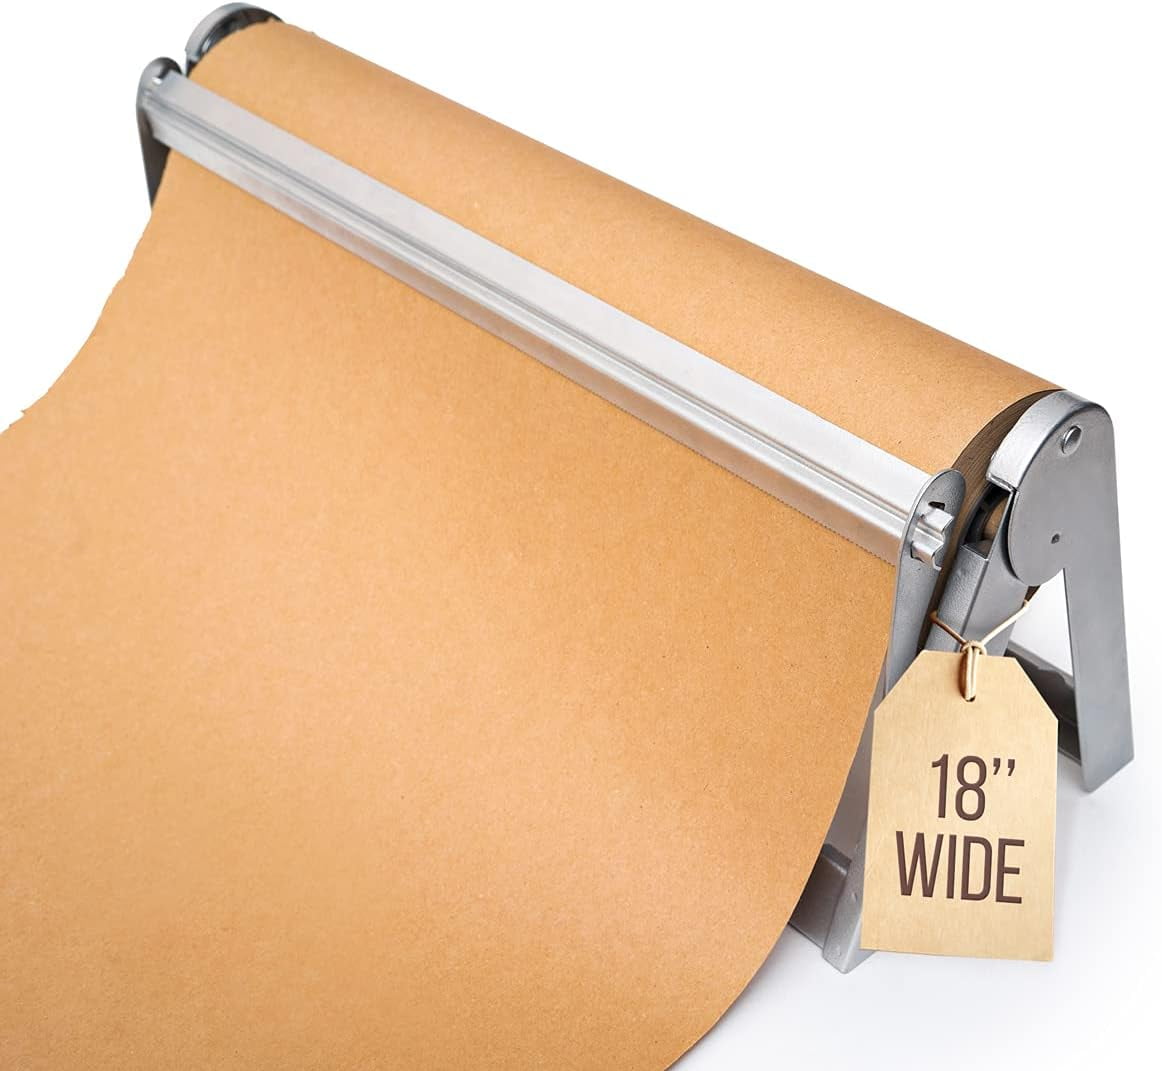 West Palm Brands Paper Roll Cutter, Holder & Dispenser for Butcher Freezer  Craft Paper Rolls 24, Great Butcher, Wrapping, Crafting Paper or Vinyl